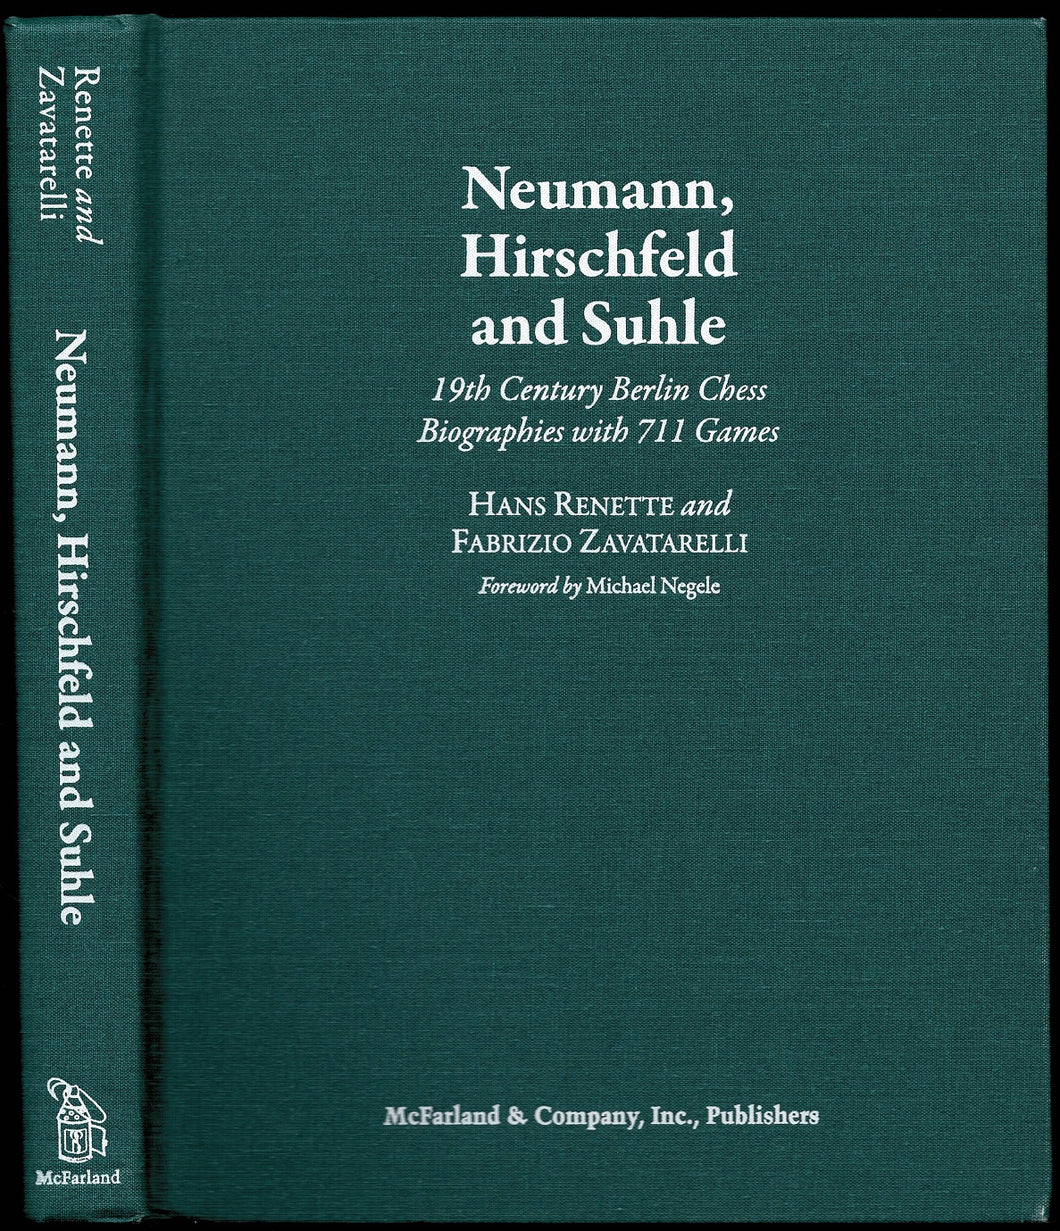 Neumann, Hirschfeld and Suhle: 19th Century Berlin Chess Biographies with 711 Games